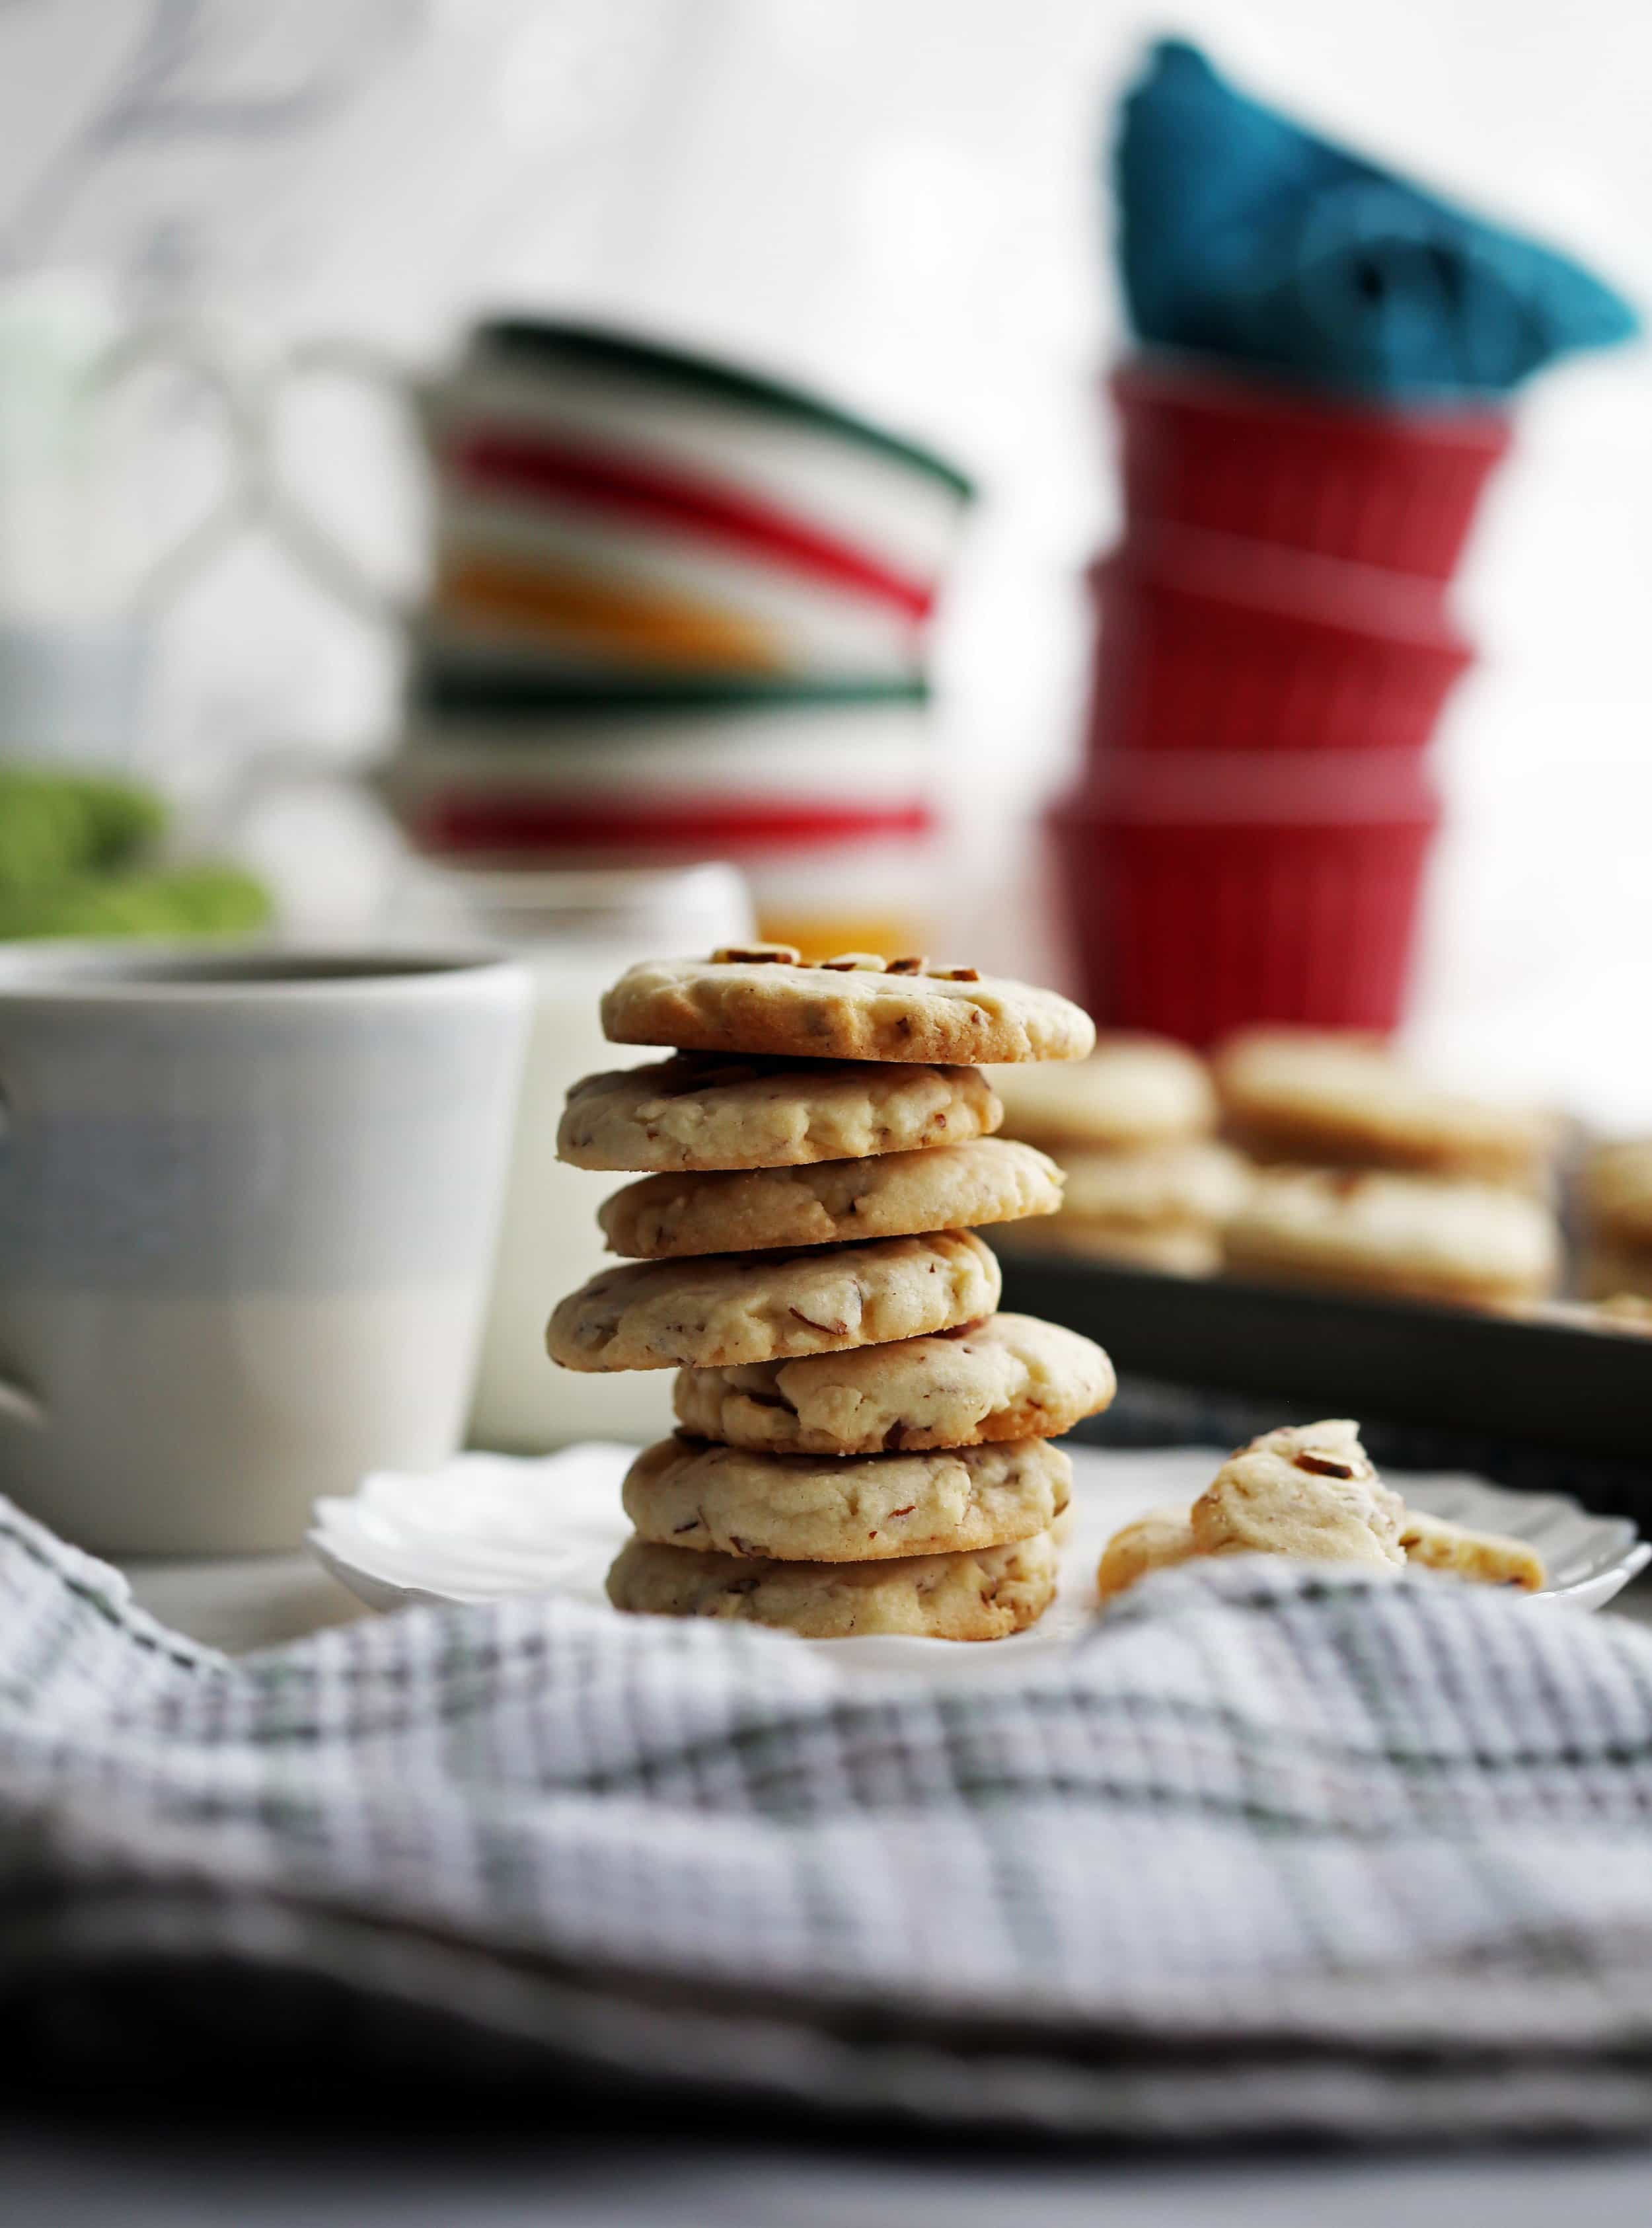 A stack of seven crunchy almond cookies on a white plate with cookies and coffee in the background.